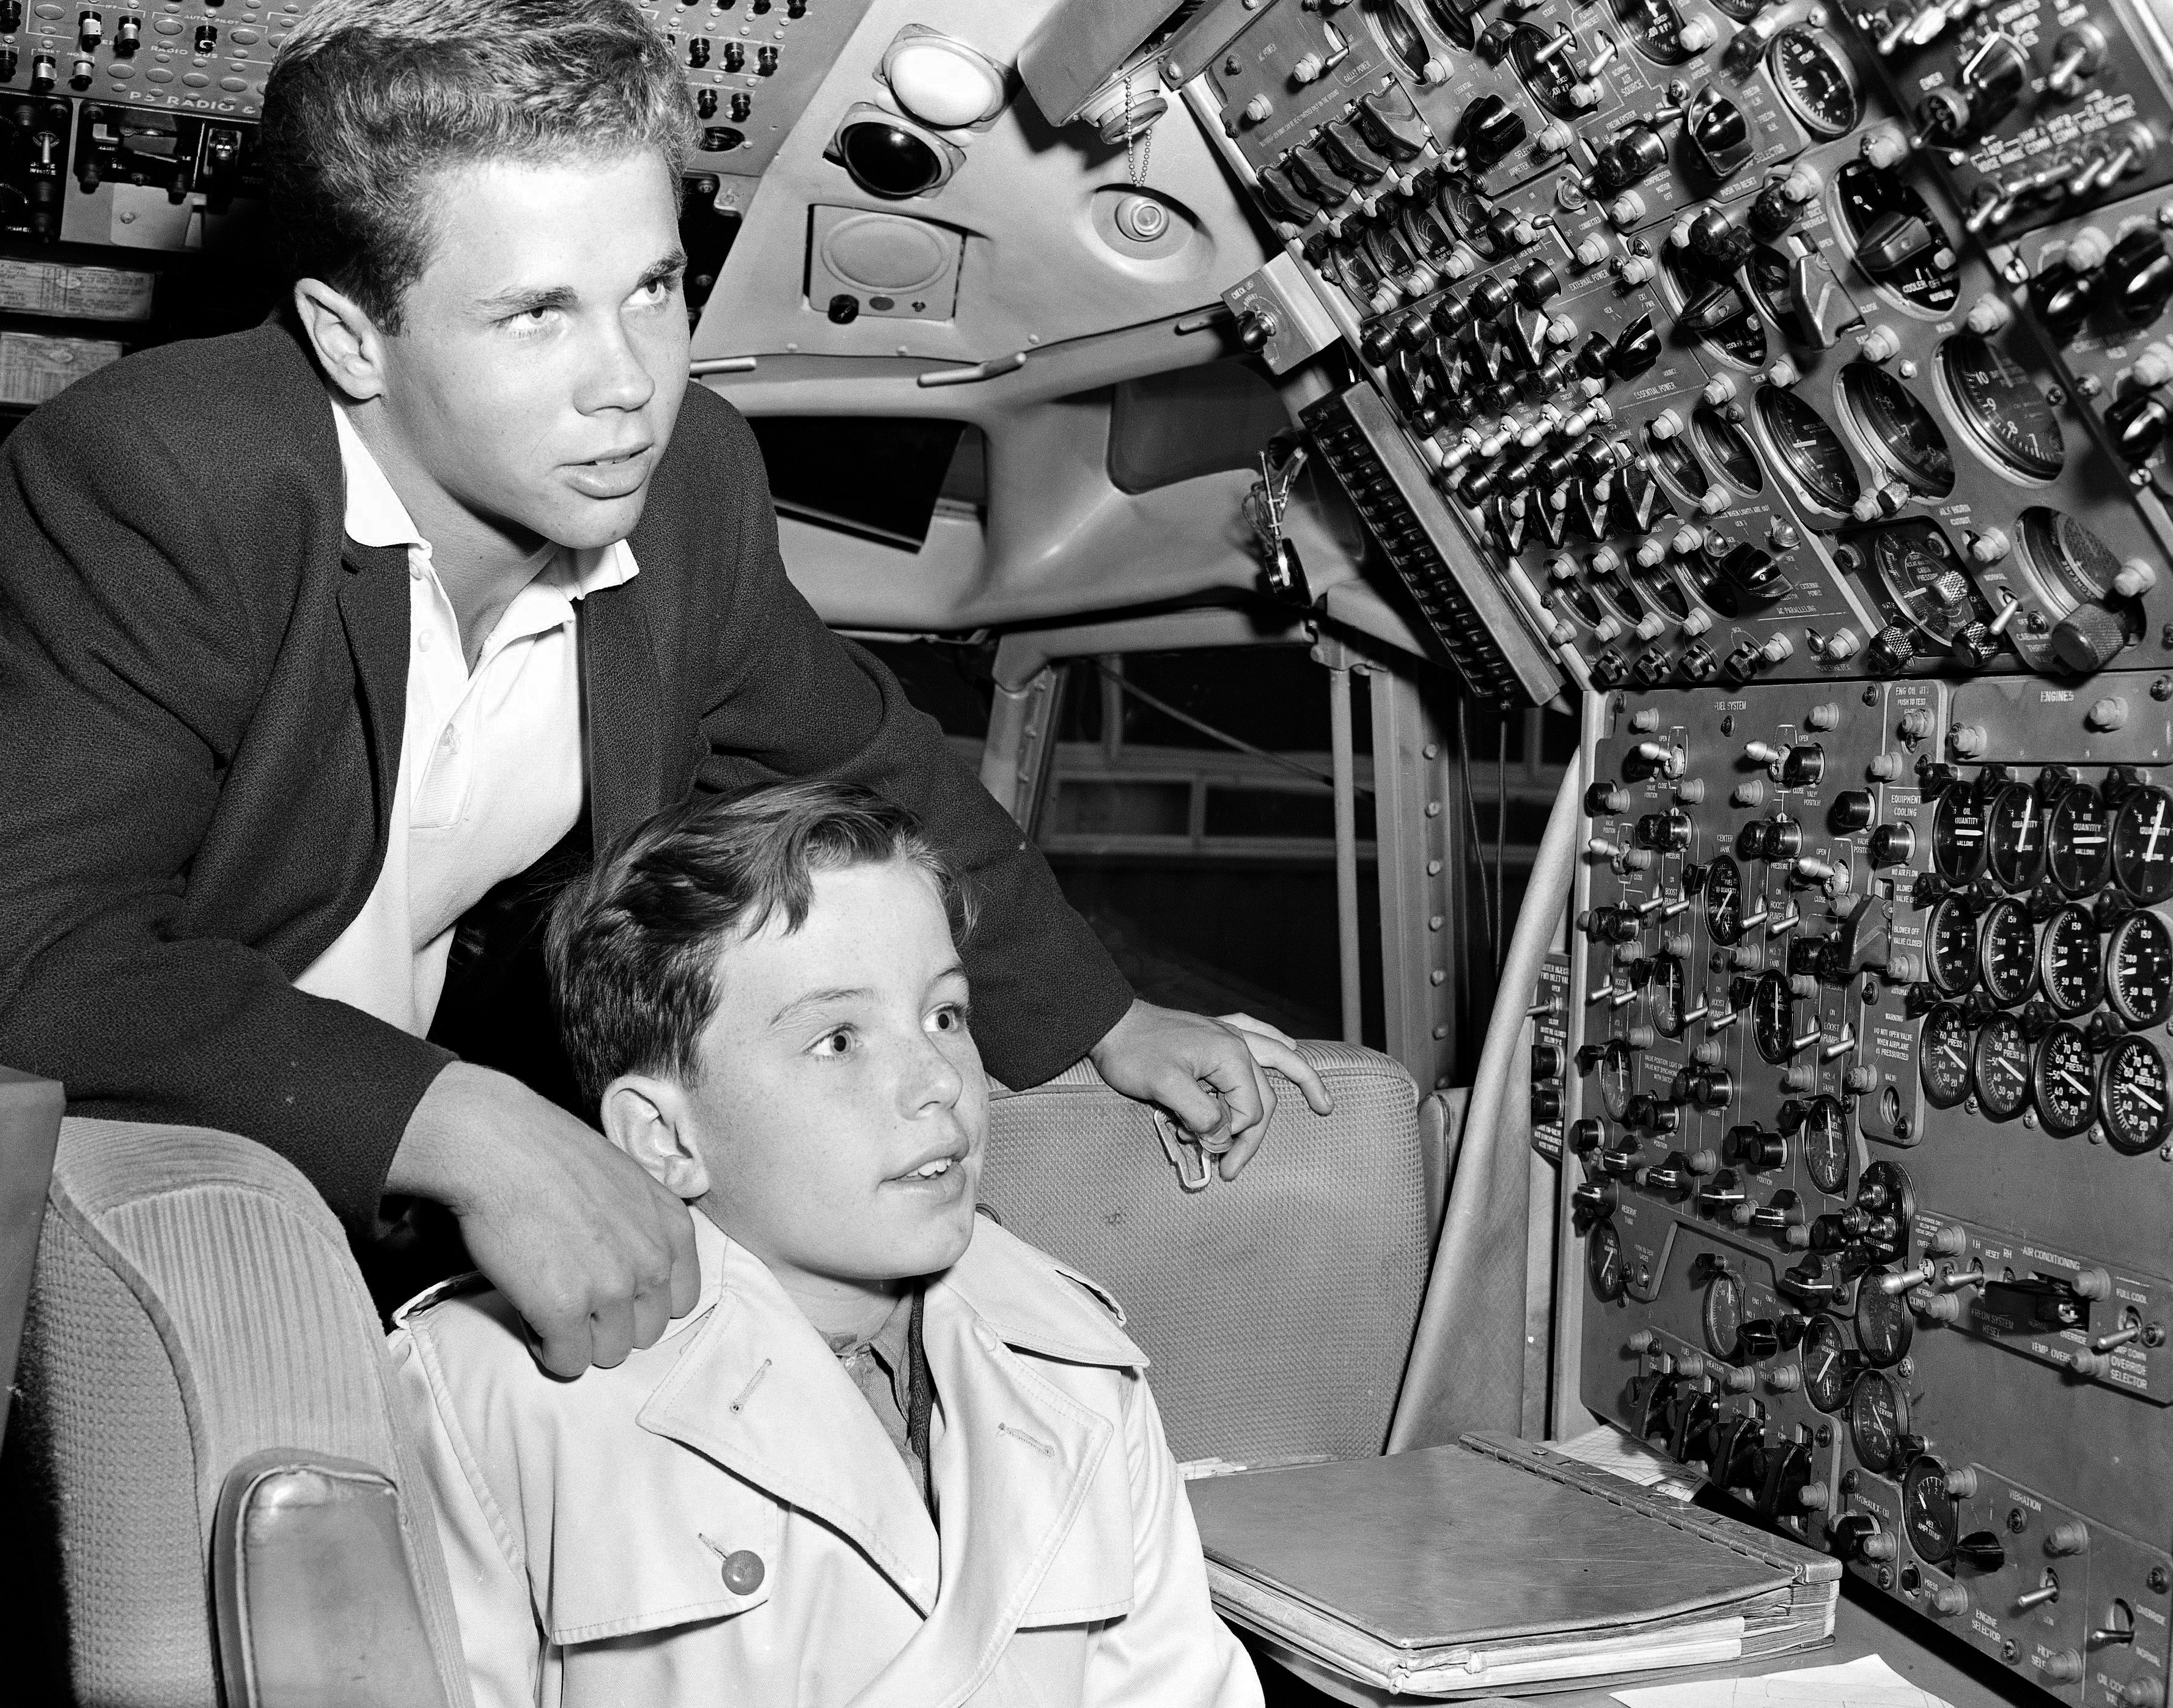 'Leave It to Beaver' star Tony Dow stands behind his co-star,Jerry Mathers, who sits in a chair in the cockpit of an airplane